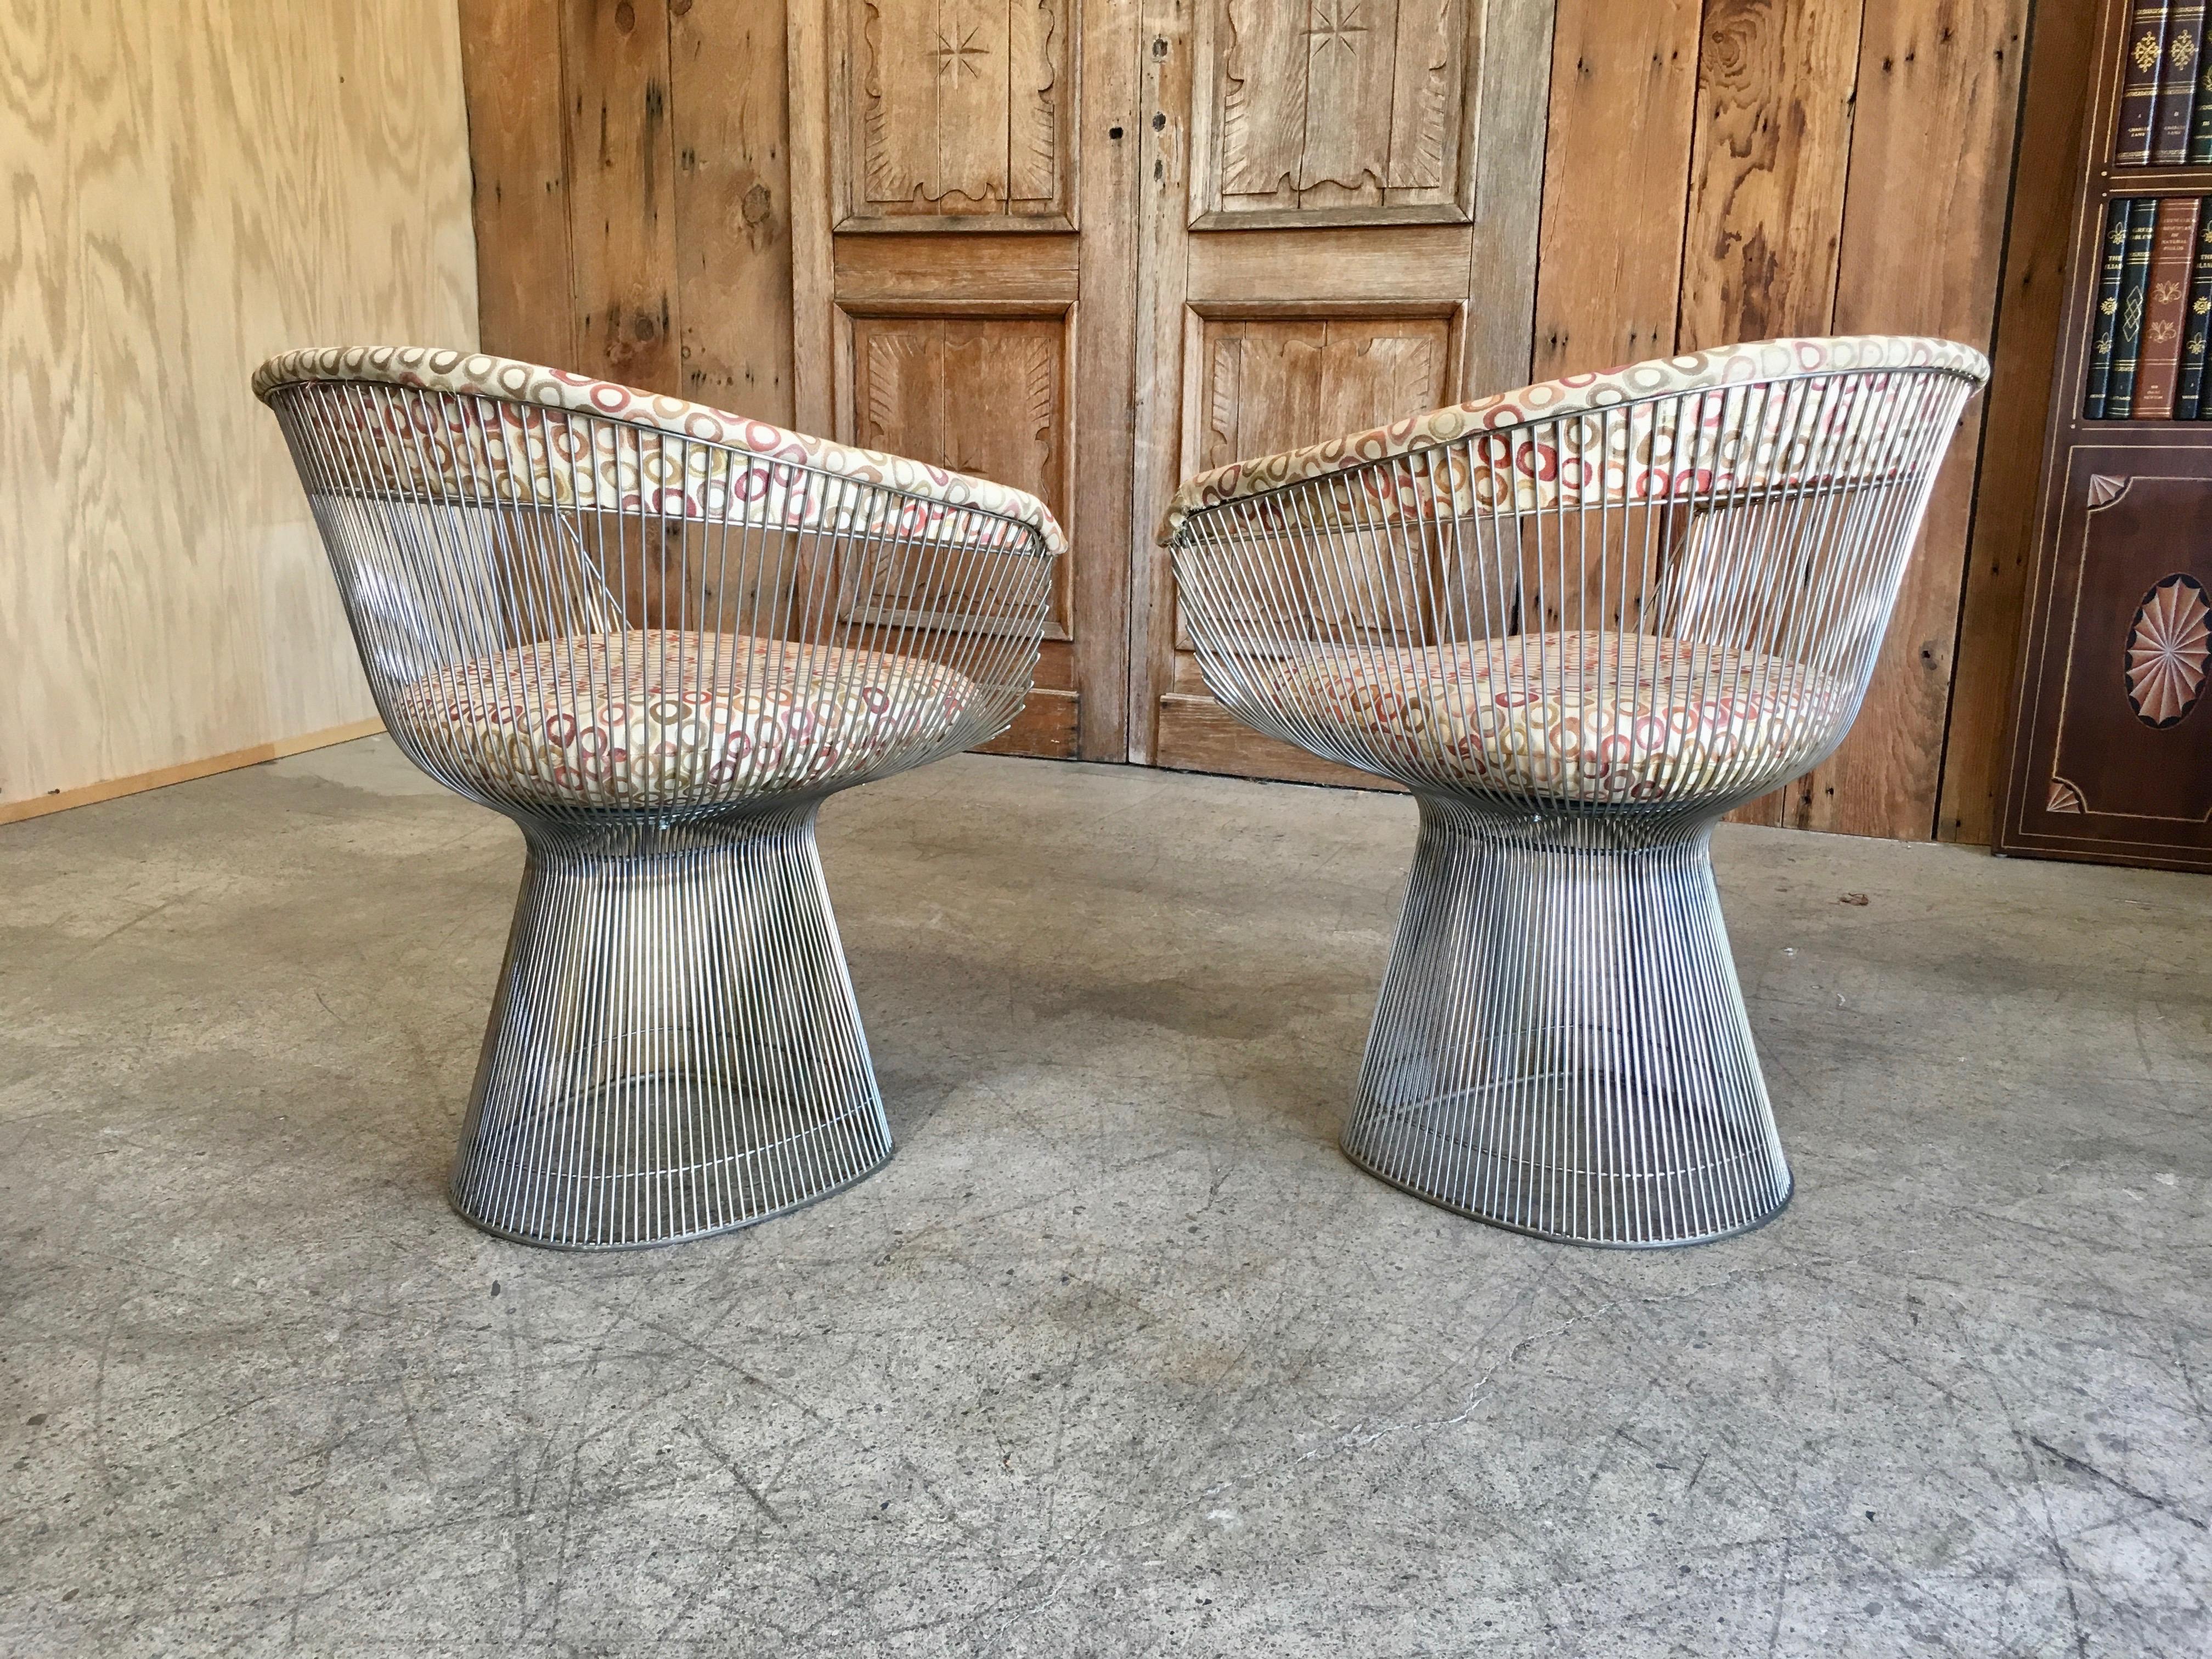 Upholstery Set of Two Midcentury Chairs by Warren Platner for Knoll Chairs